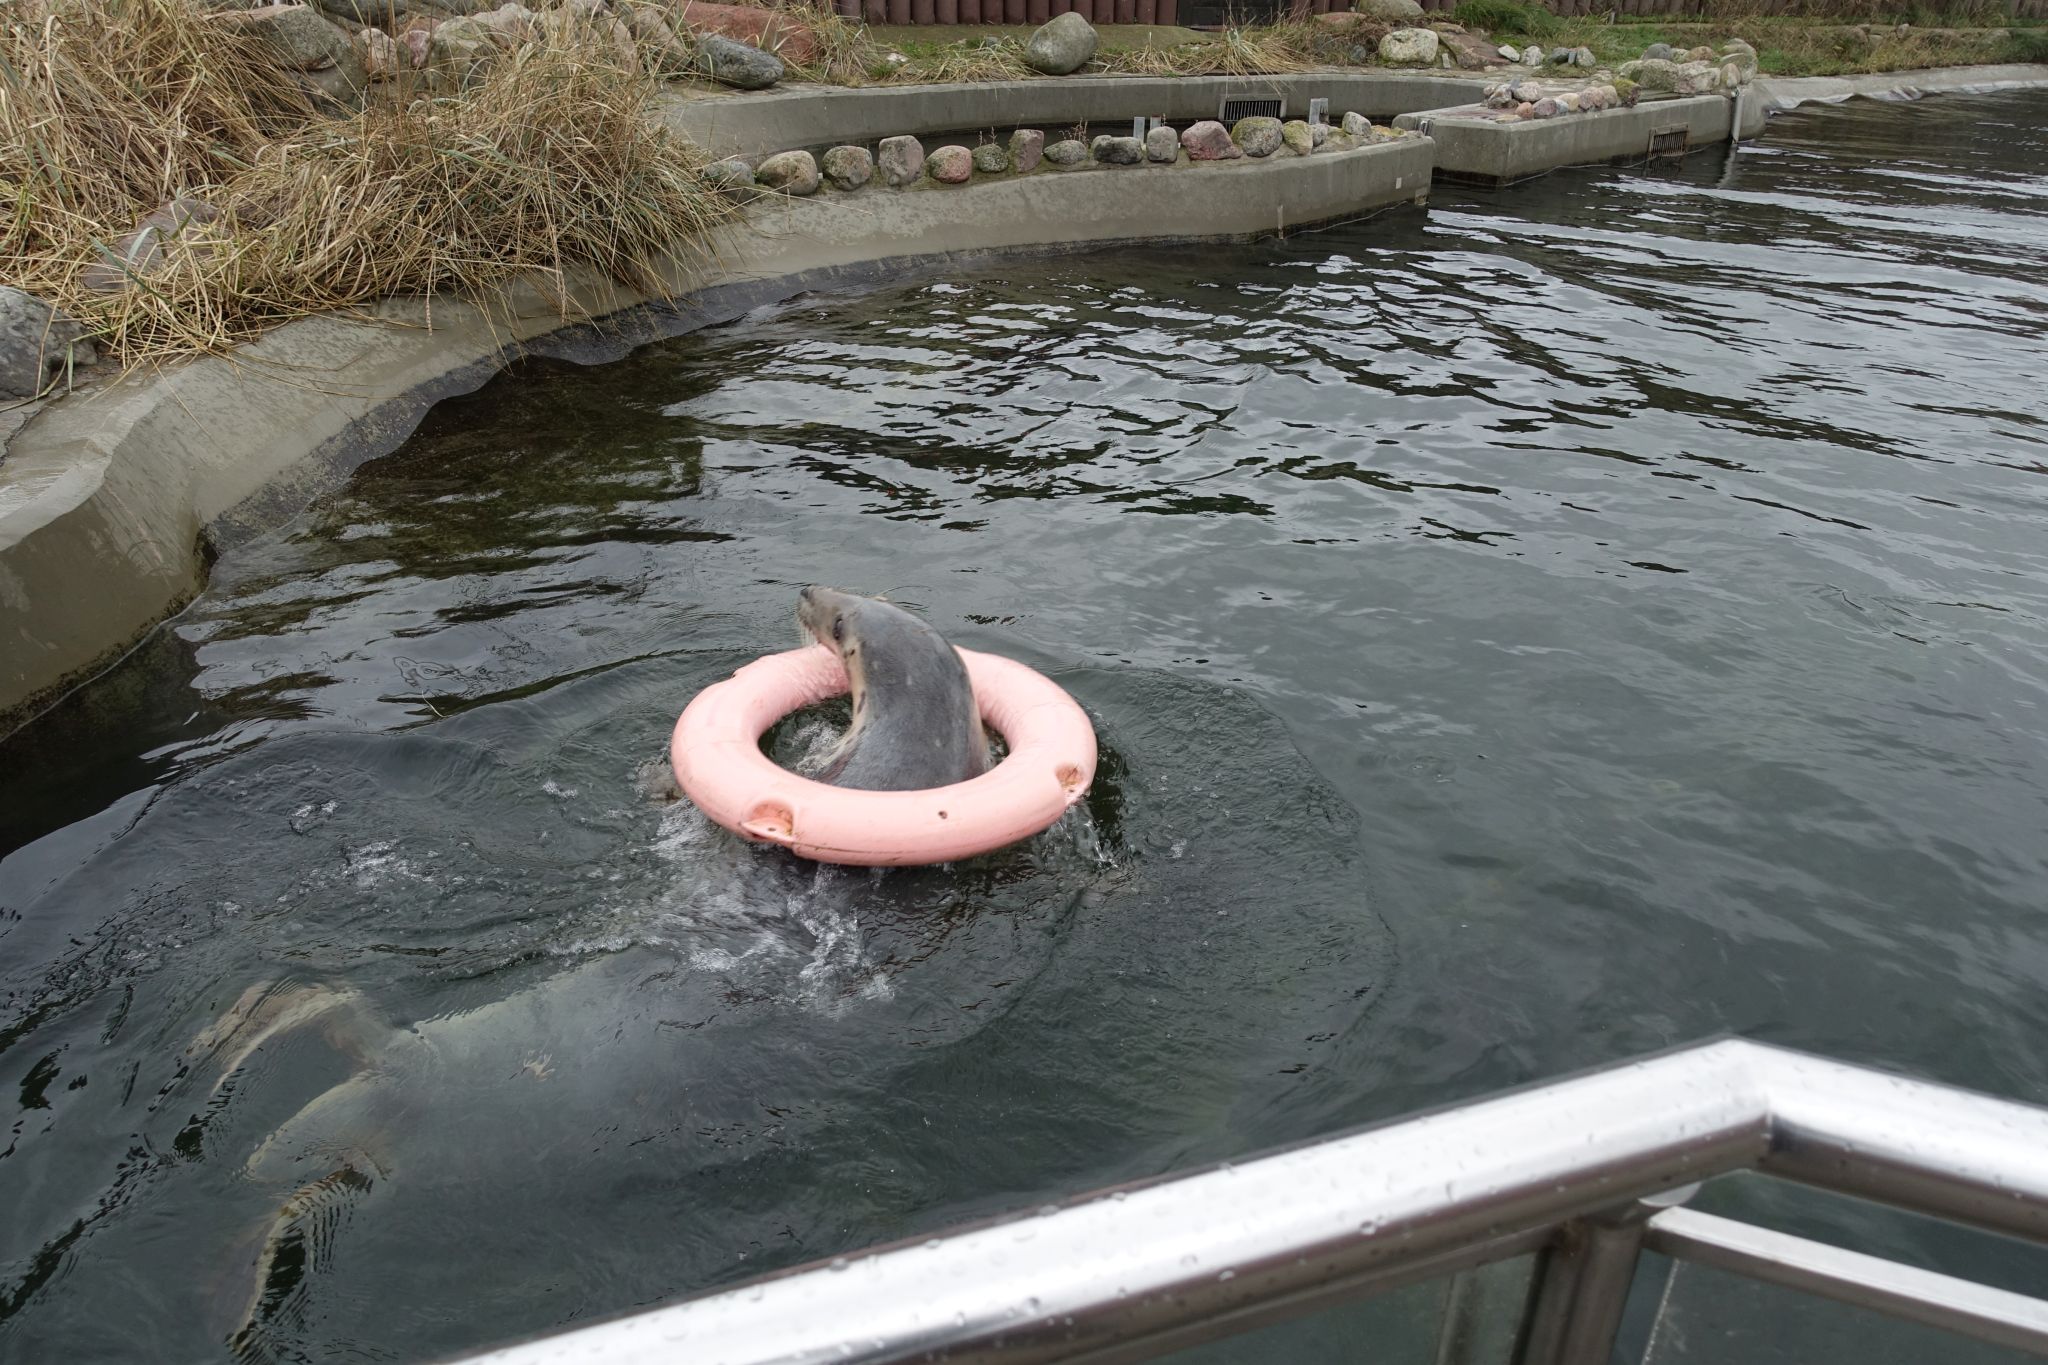 A seal swimming in a pink lifebuoy.